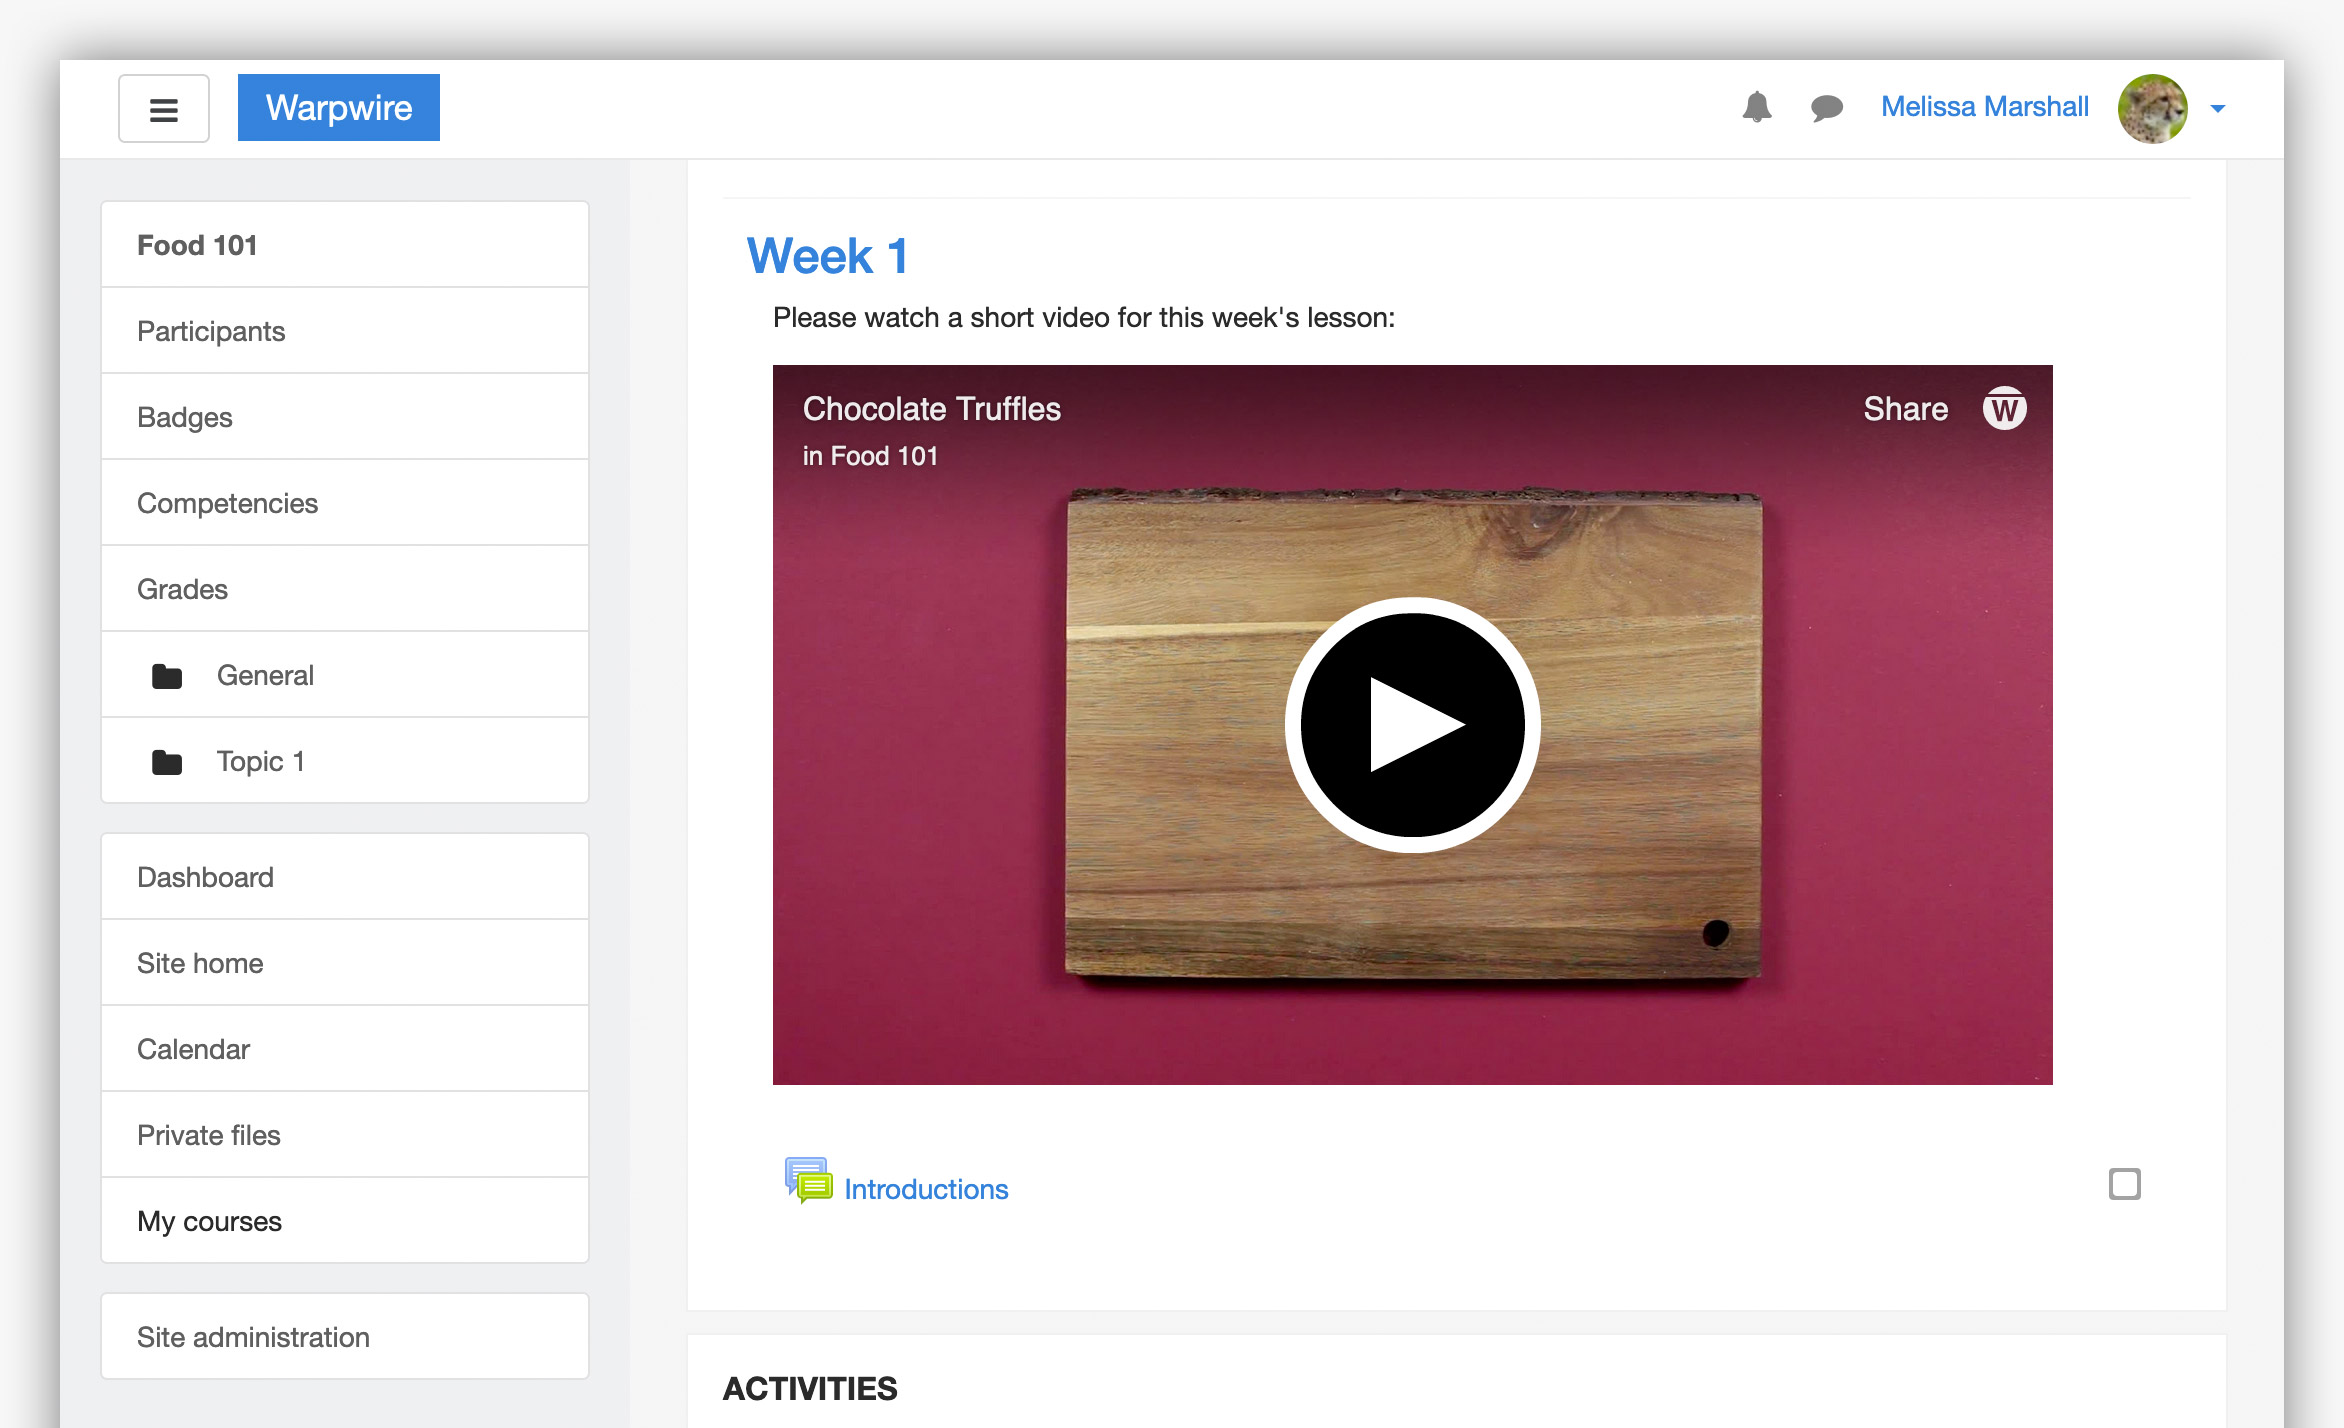 Read more about Warpwire video platform in Moodle